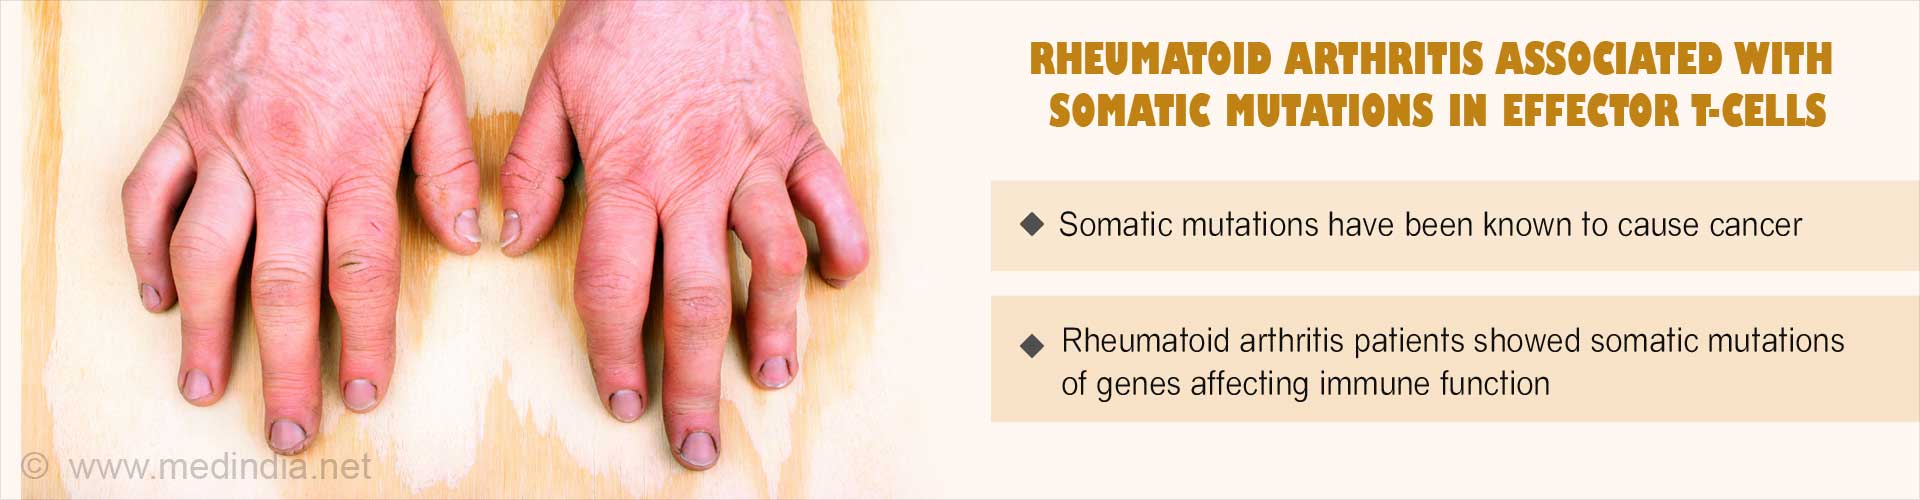 Rheumatoid arthritis associated with somatic mutations in effector T- cells
- Somatic mutations have been known to cause cancer
- Rheumatoid arthritis patients showed somatic mutations of genes affecting immune function